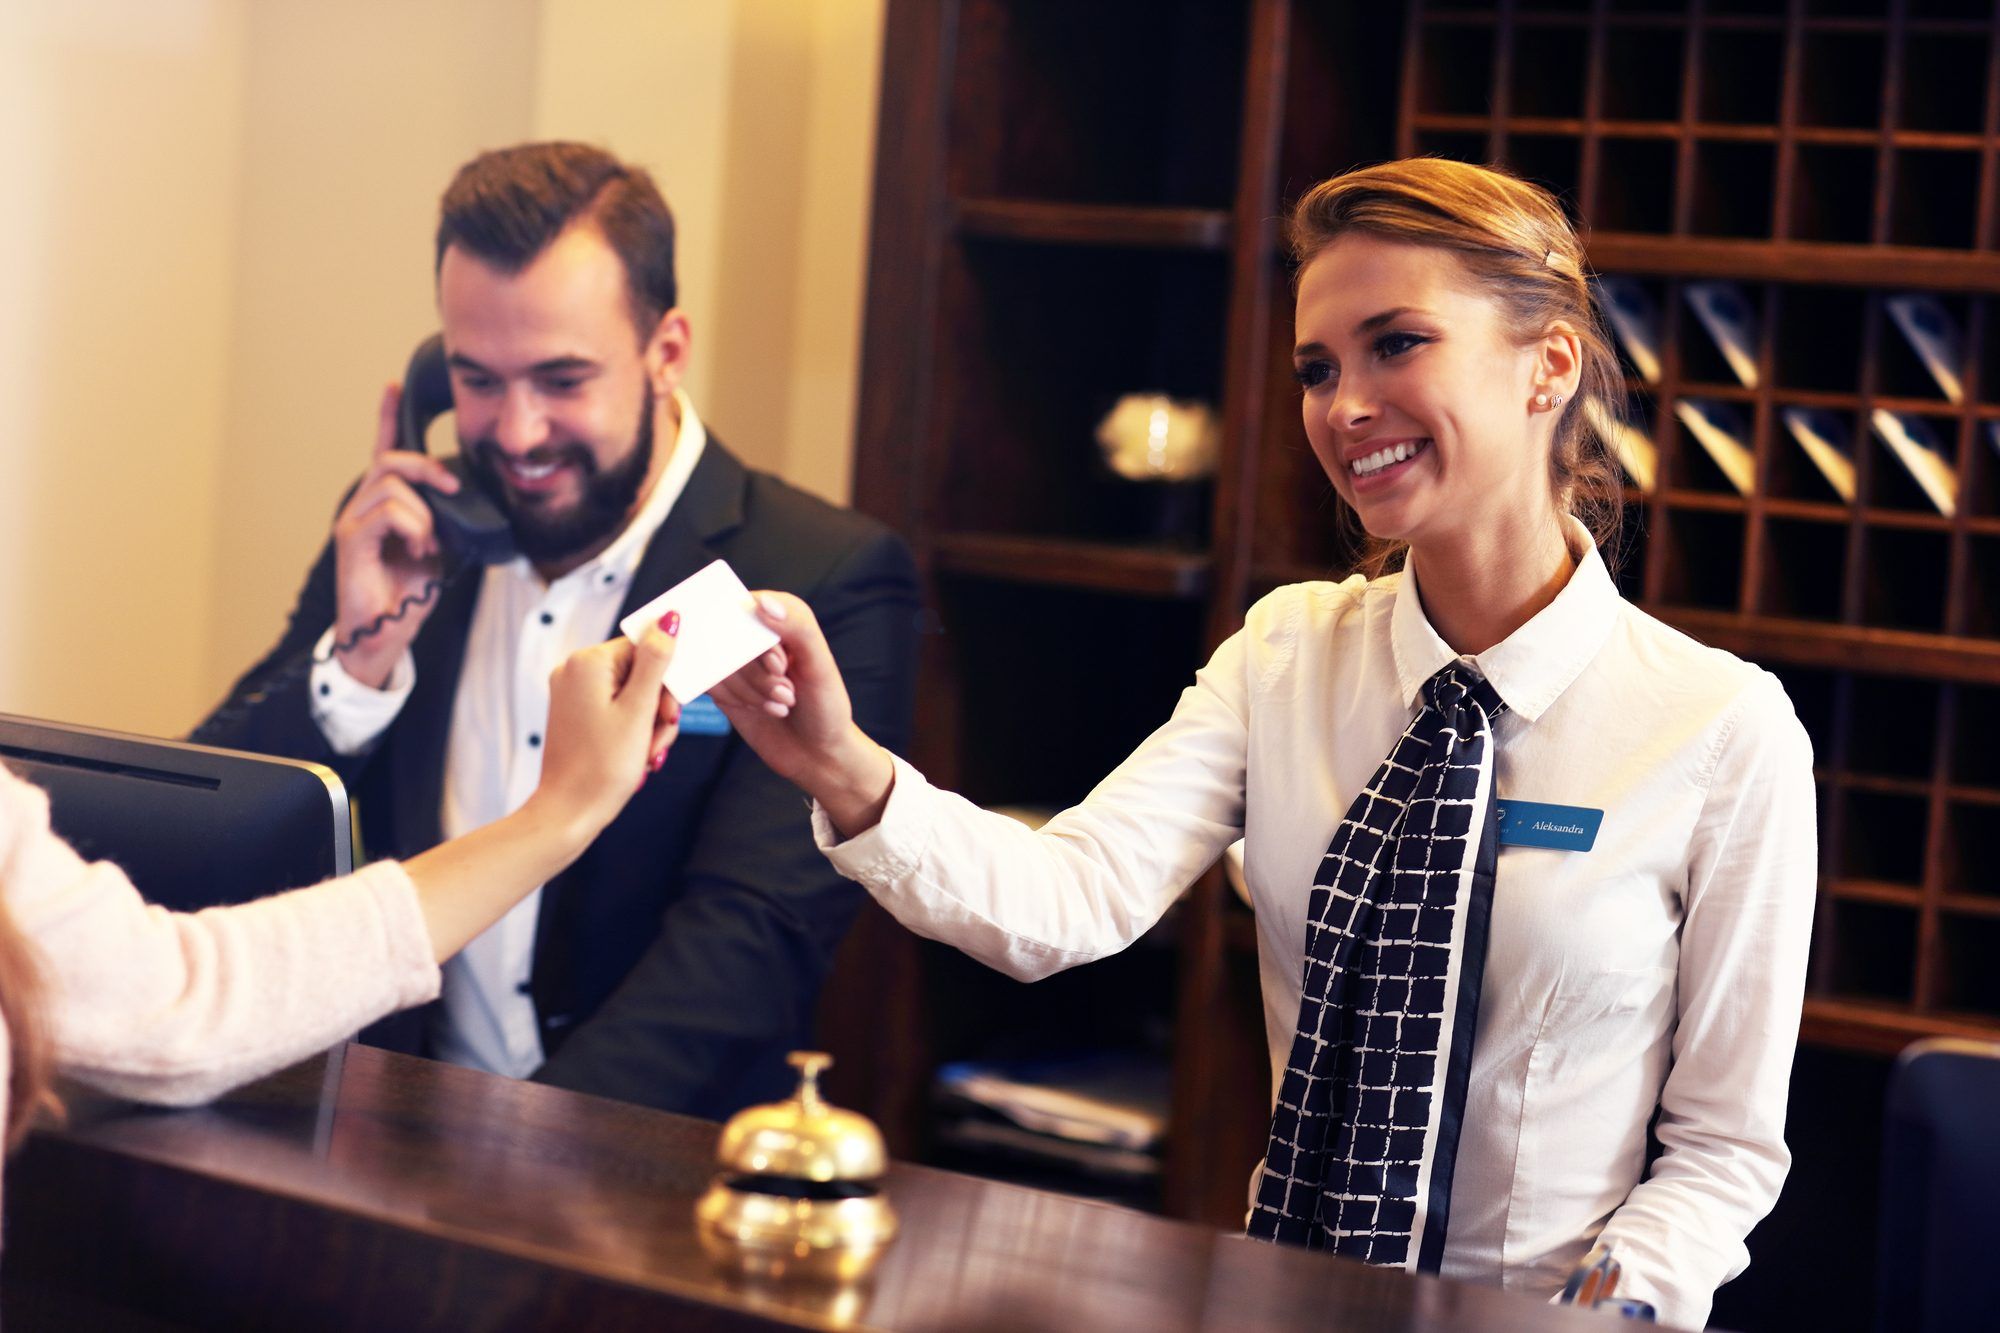 hotel front desk employee accepting credit card